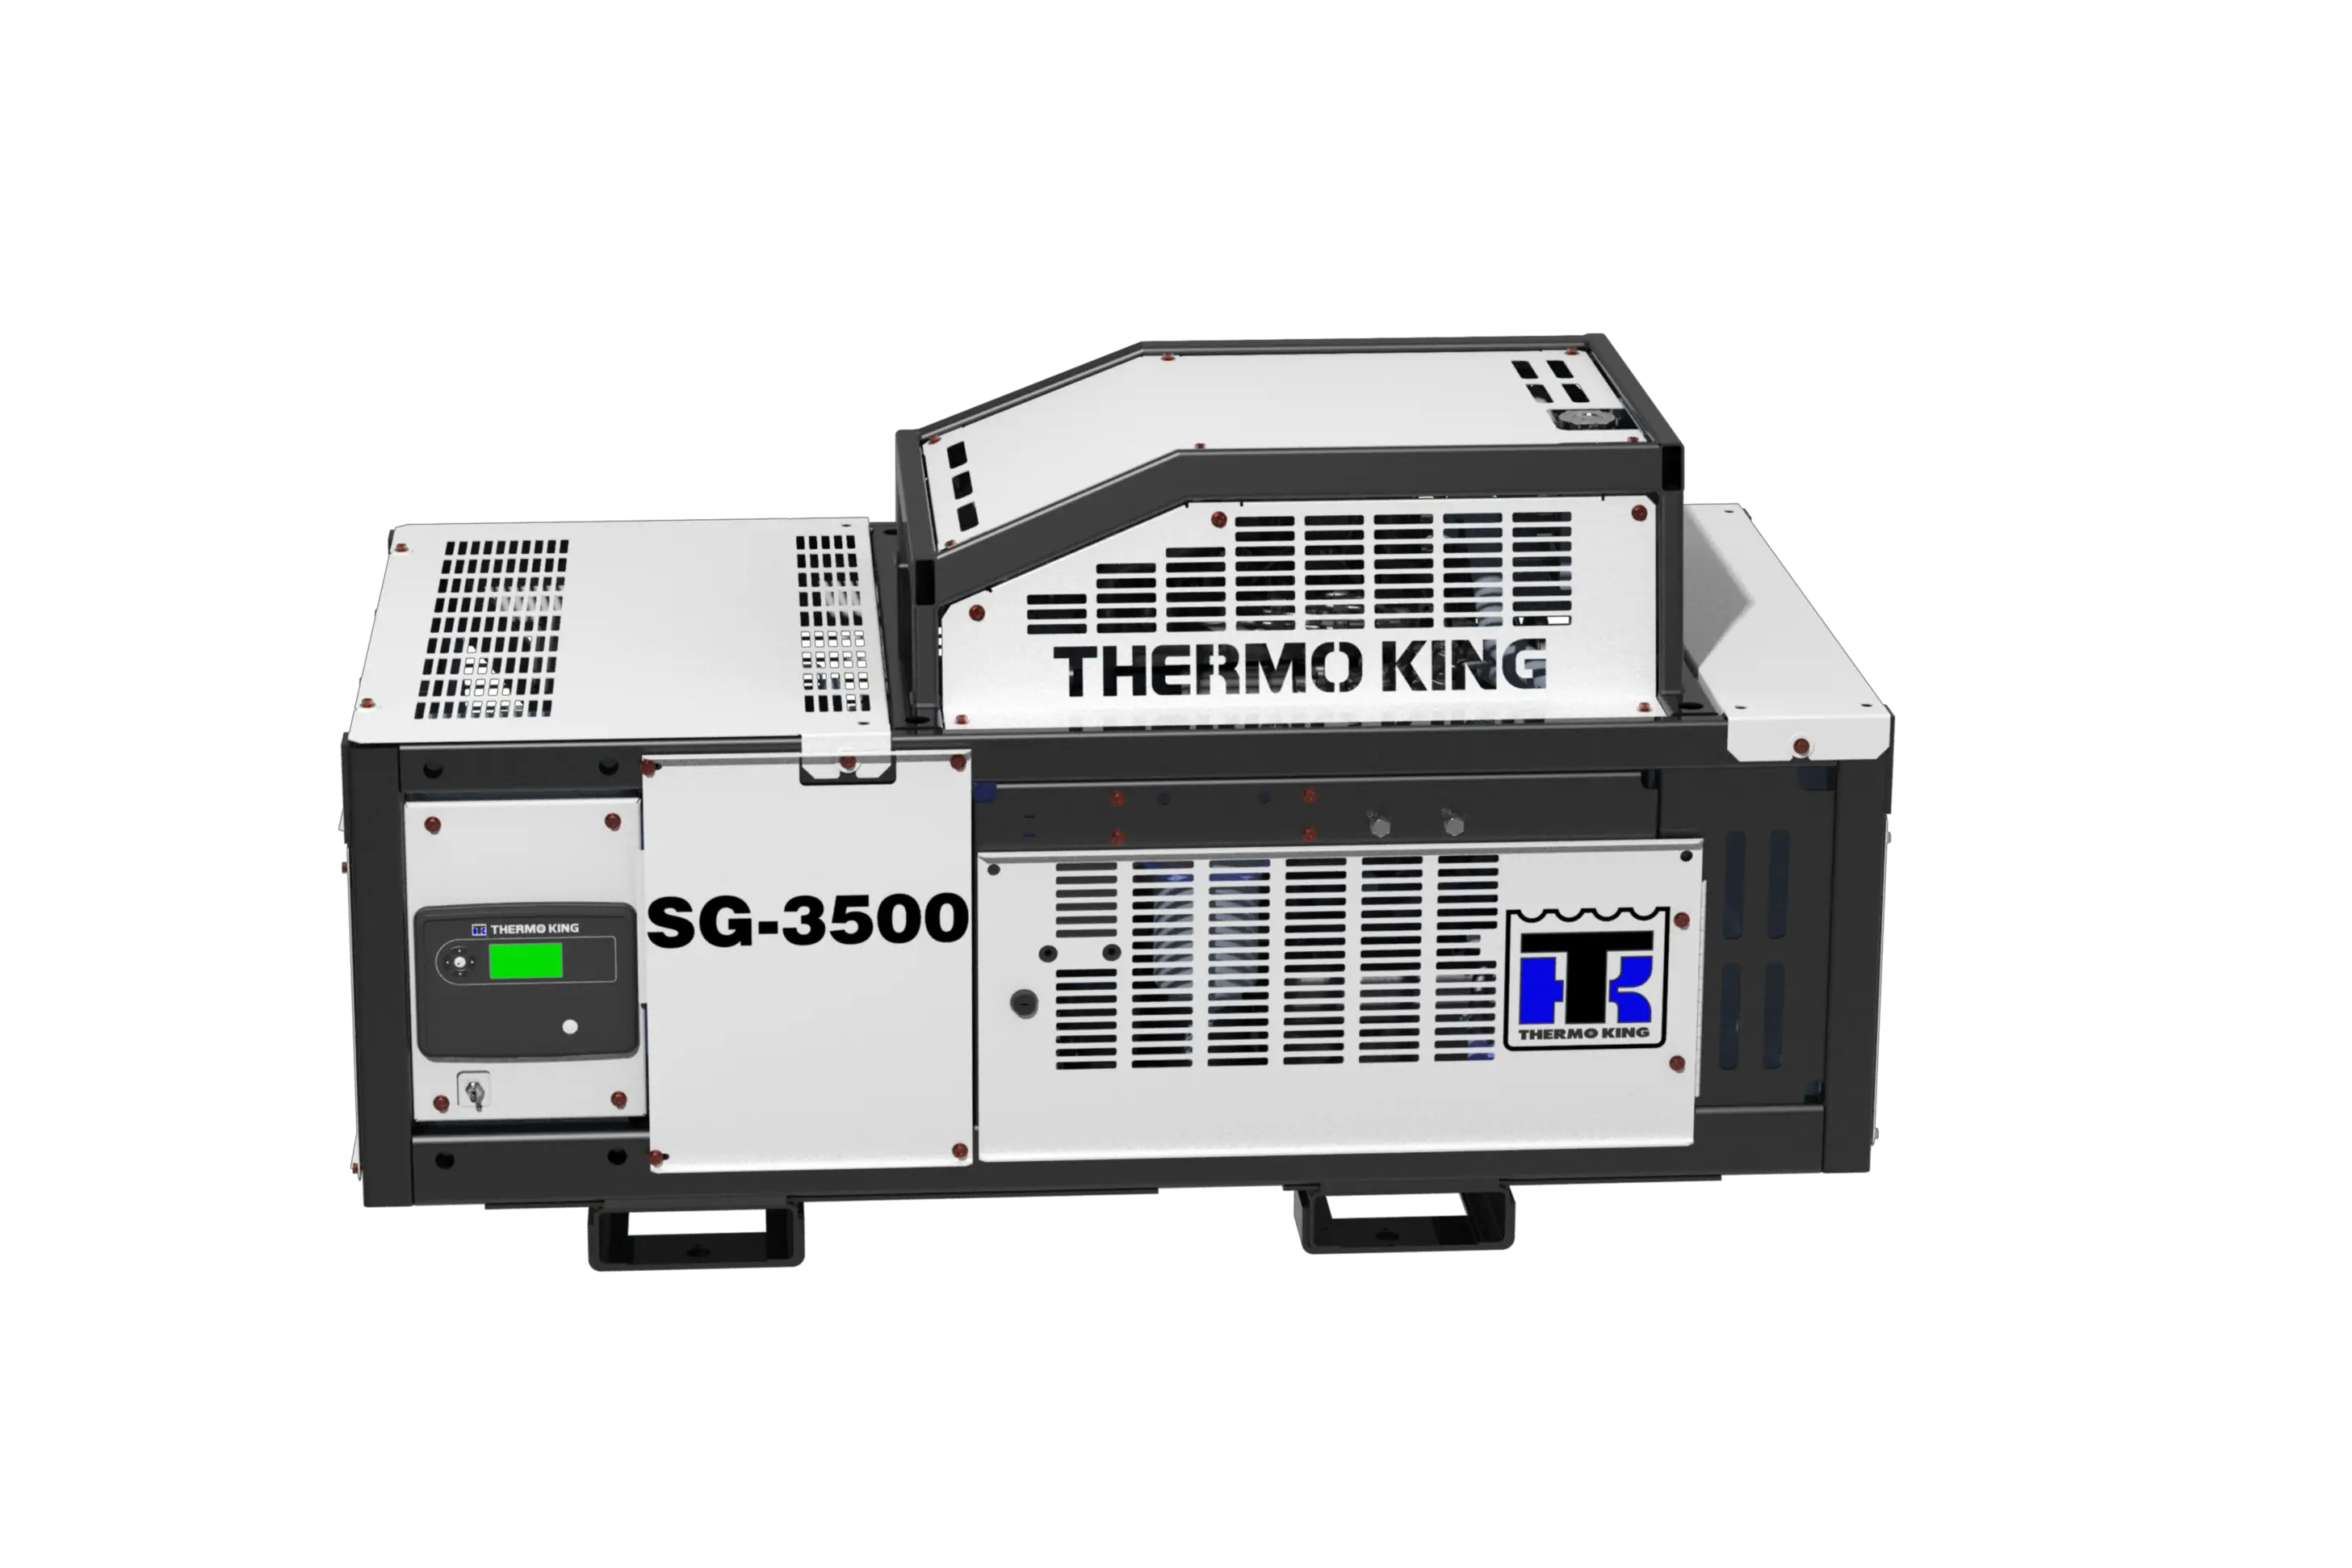 Thermo King SGCO - 3500 genset new or used available for rent or sale by ContainerID in Antwerp for truck trailer